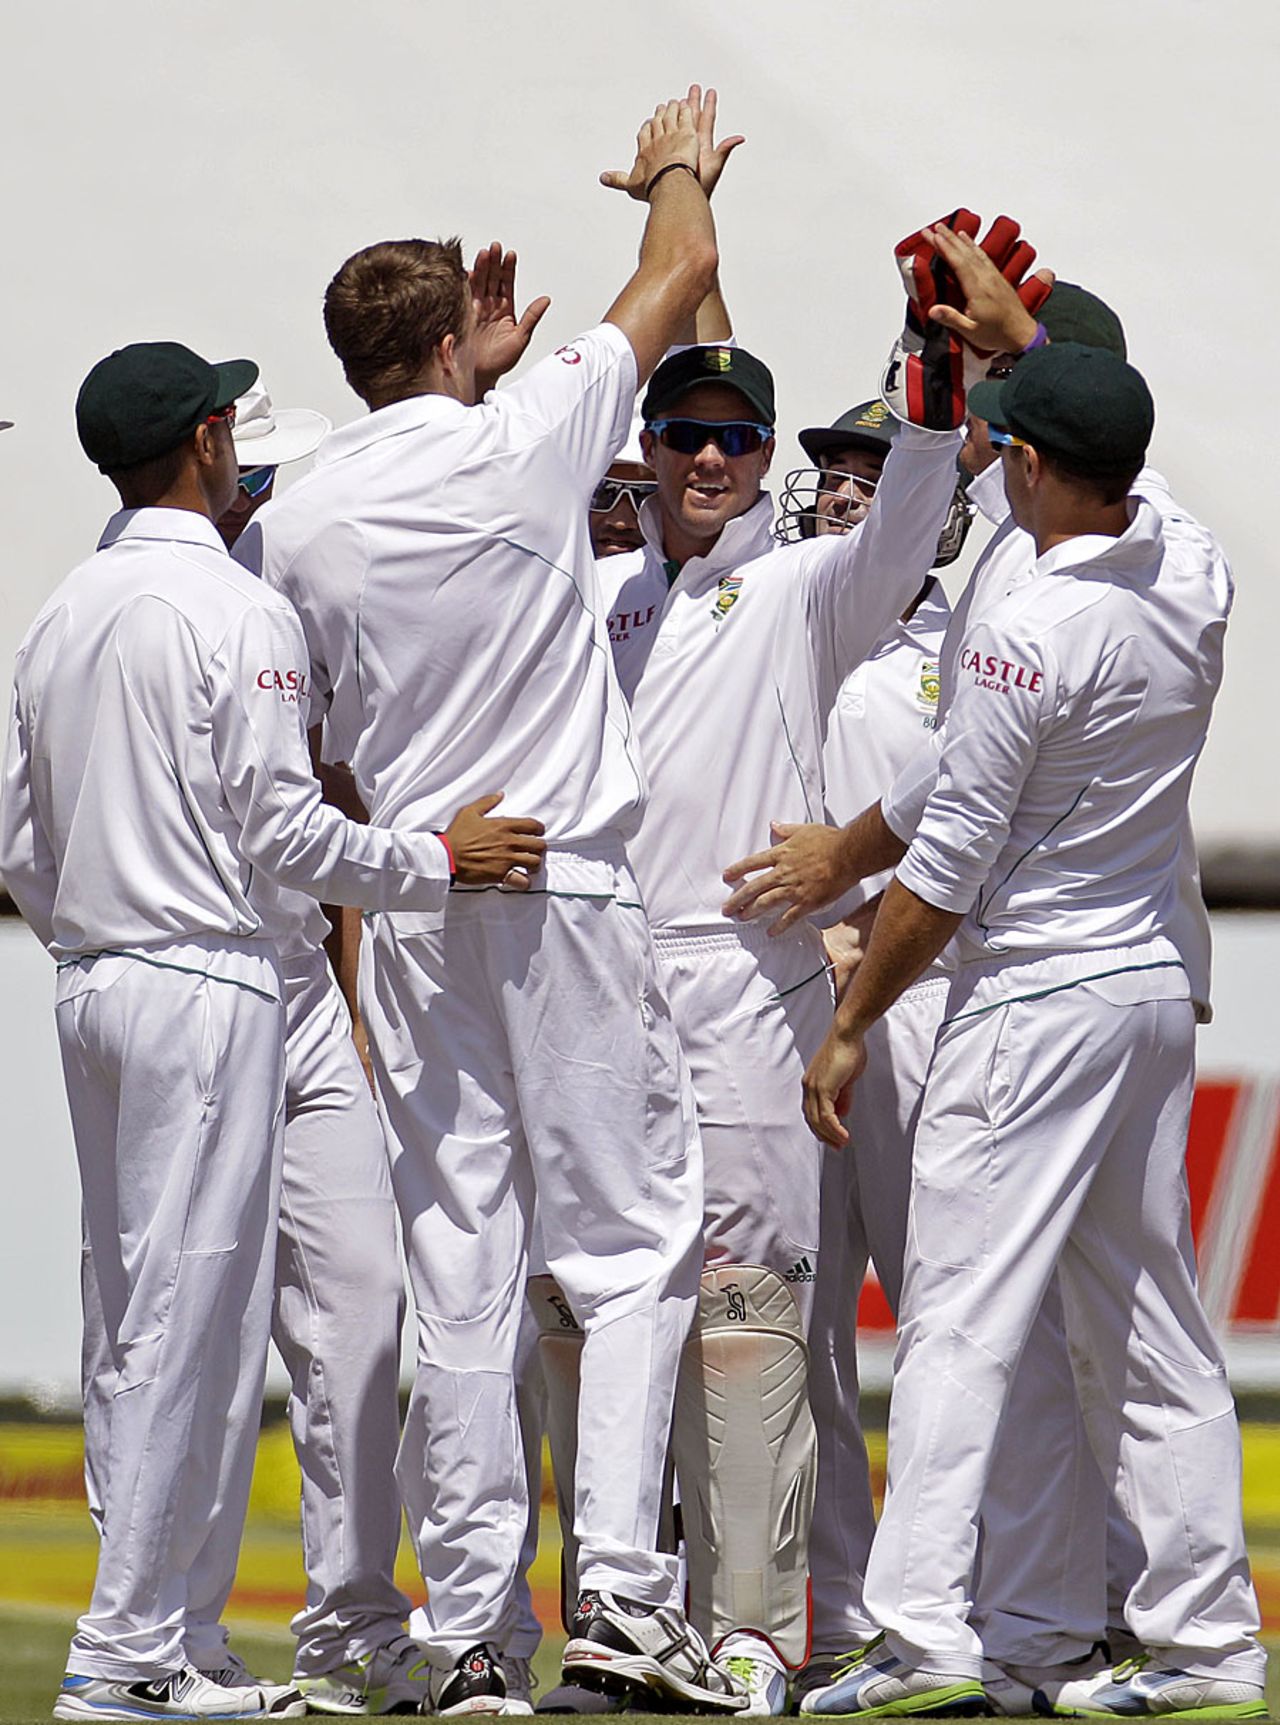 South Africa celebrate a wicket, South Africa v Pakistan, 2nd Test, Cape Town, 1st day, February 14, 2013